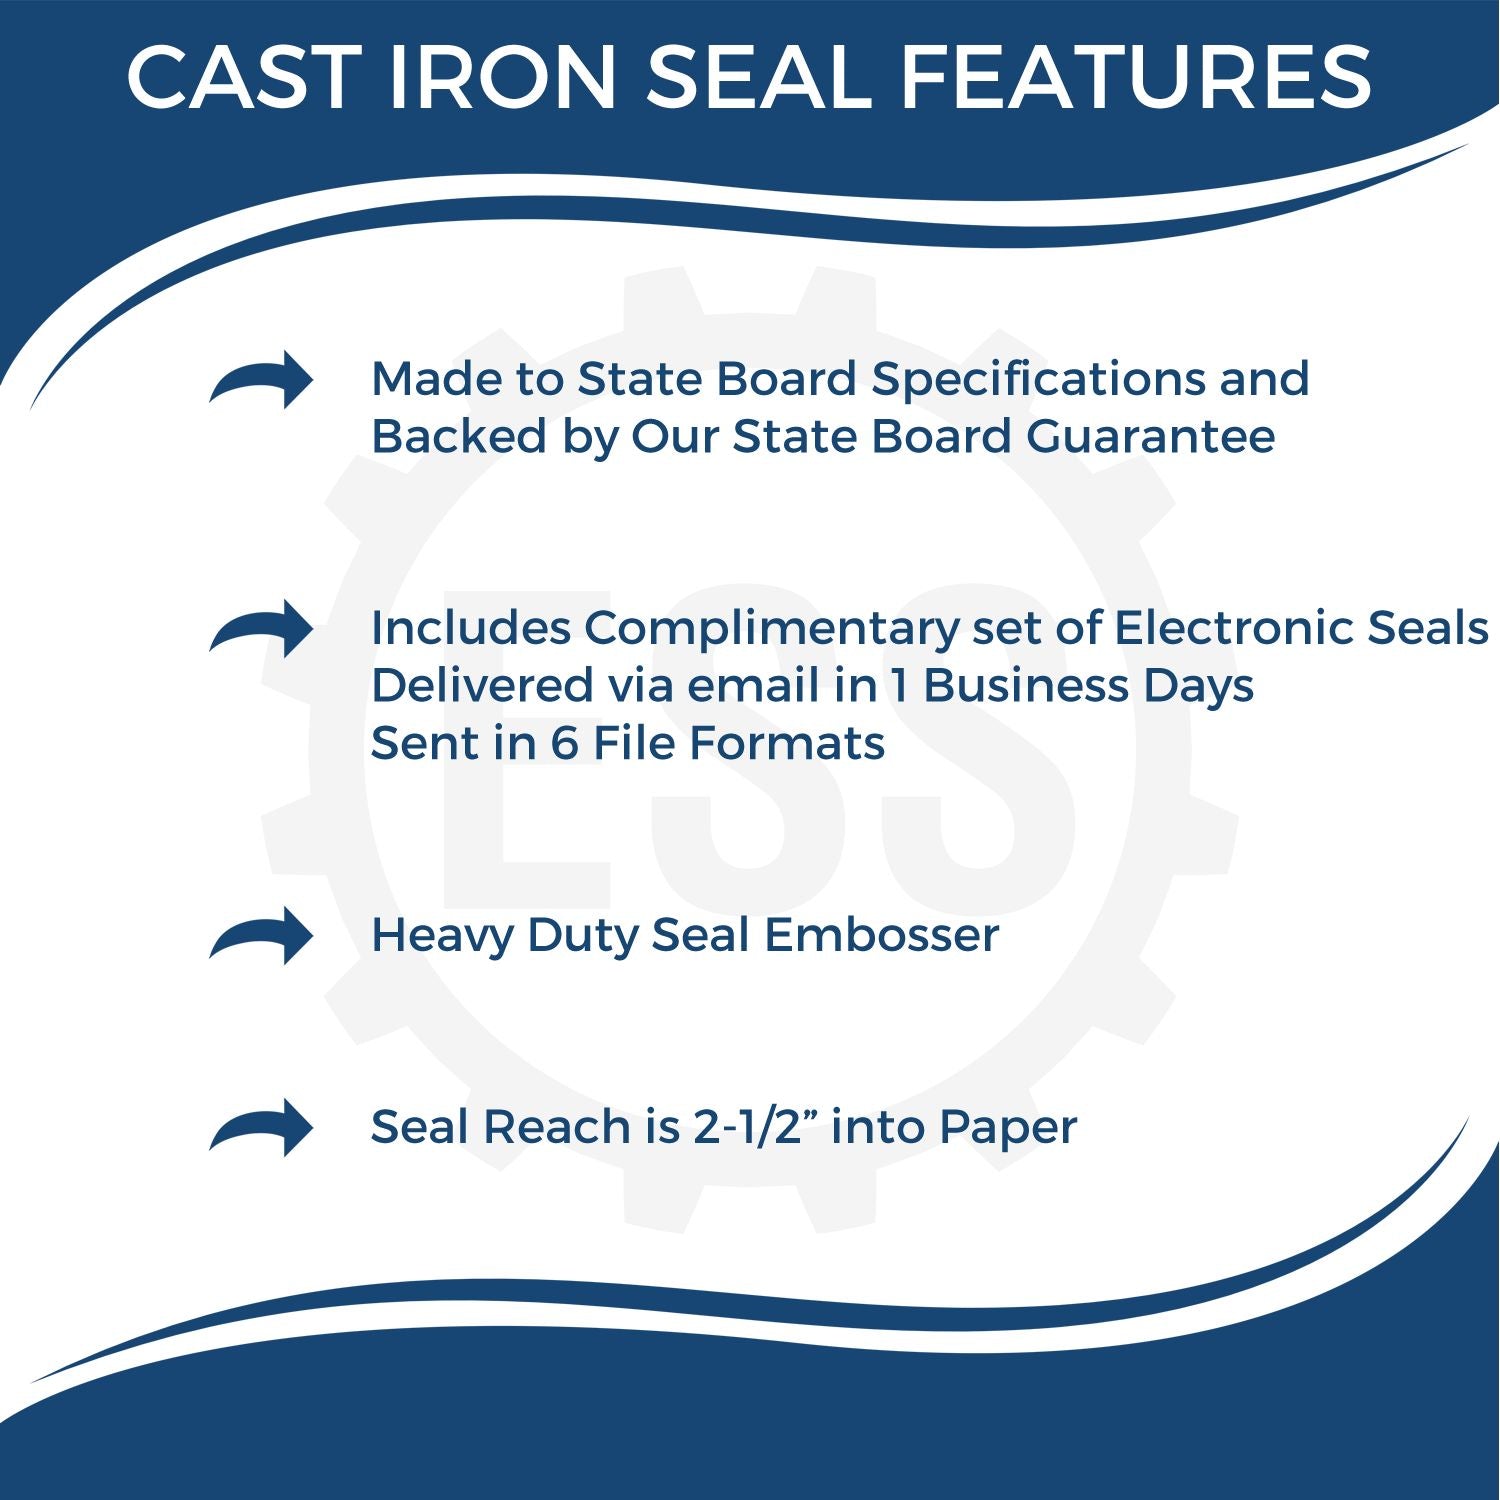 The main image for the Heavy Duty Cast Iron Montana Engineer Seal Embosser depicting a sample of the imprint and electronic files